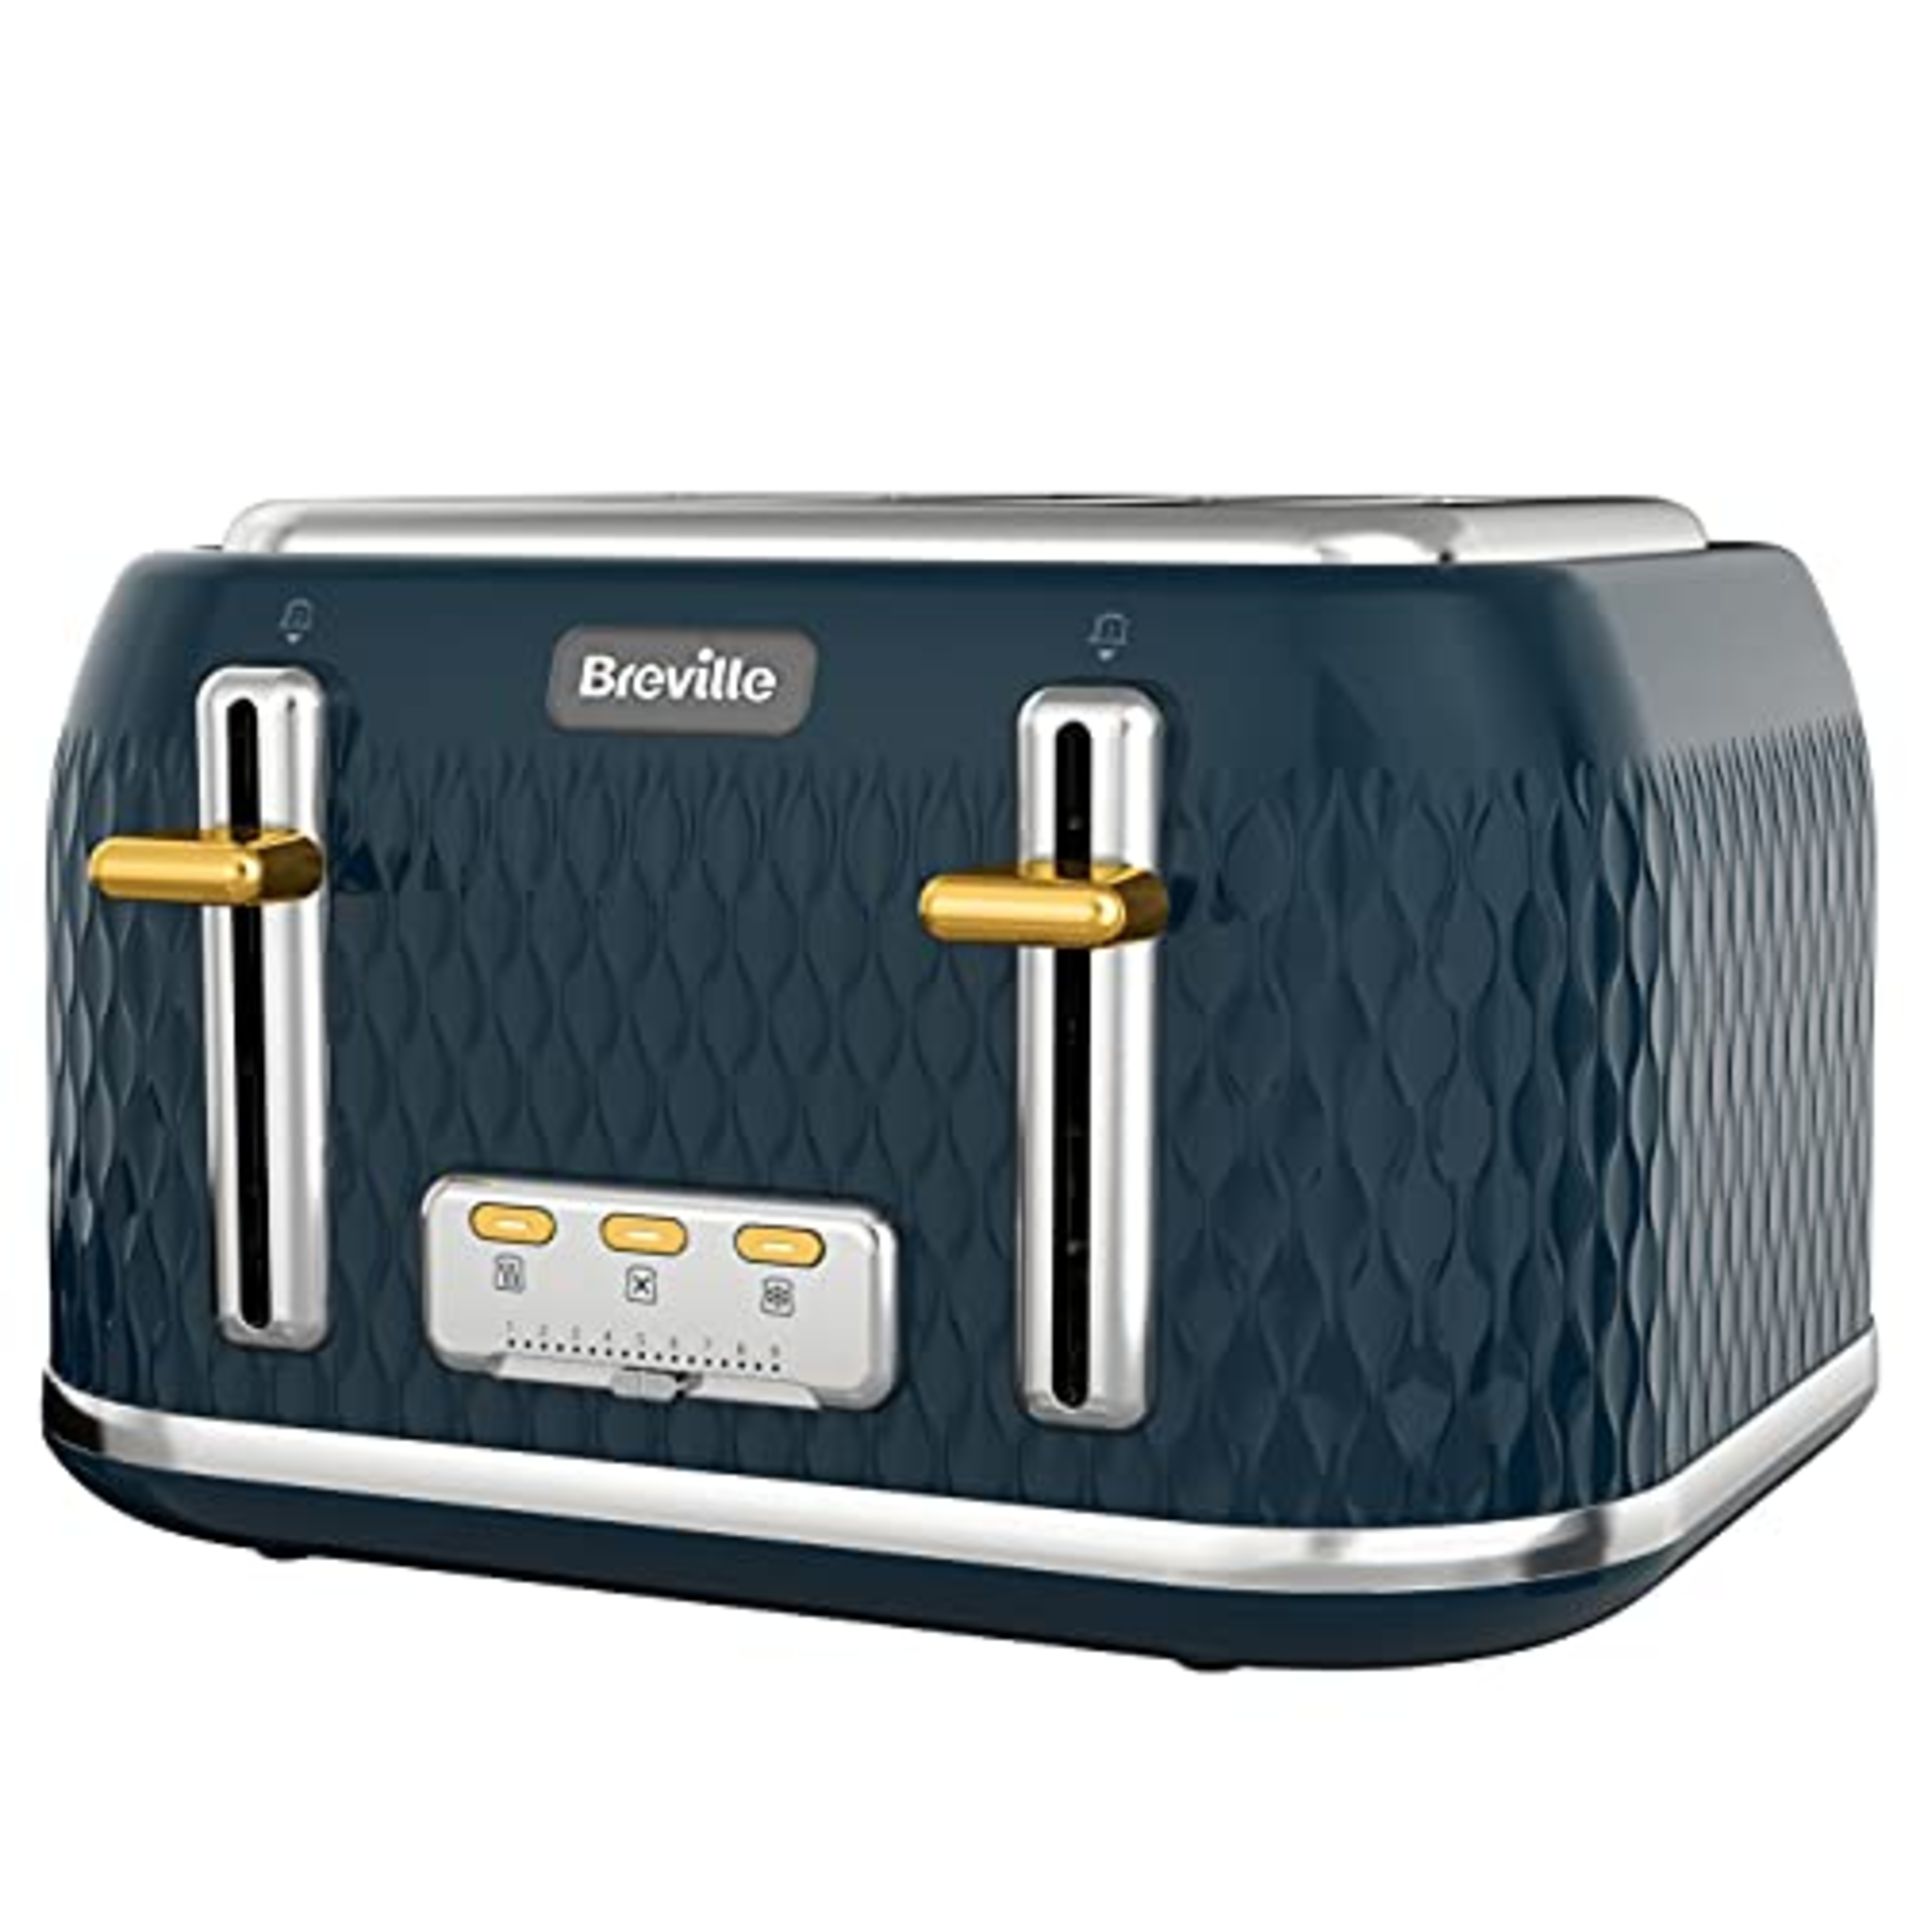 Breville Curve 4-Slice Toaster with High Lift and Wide Slots | Navy & Gold [VTT965]